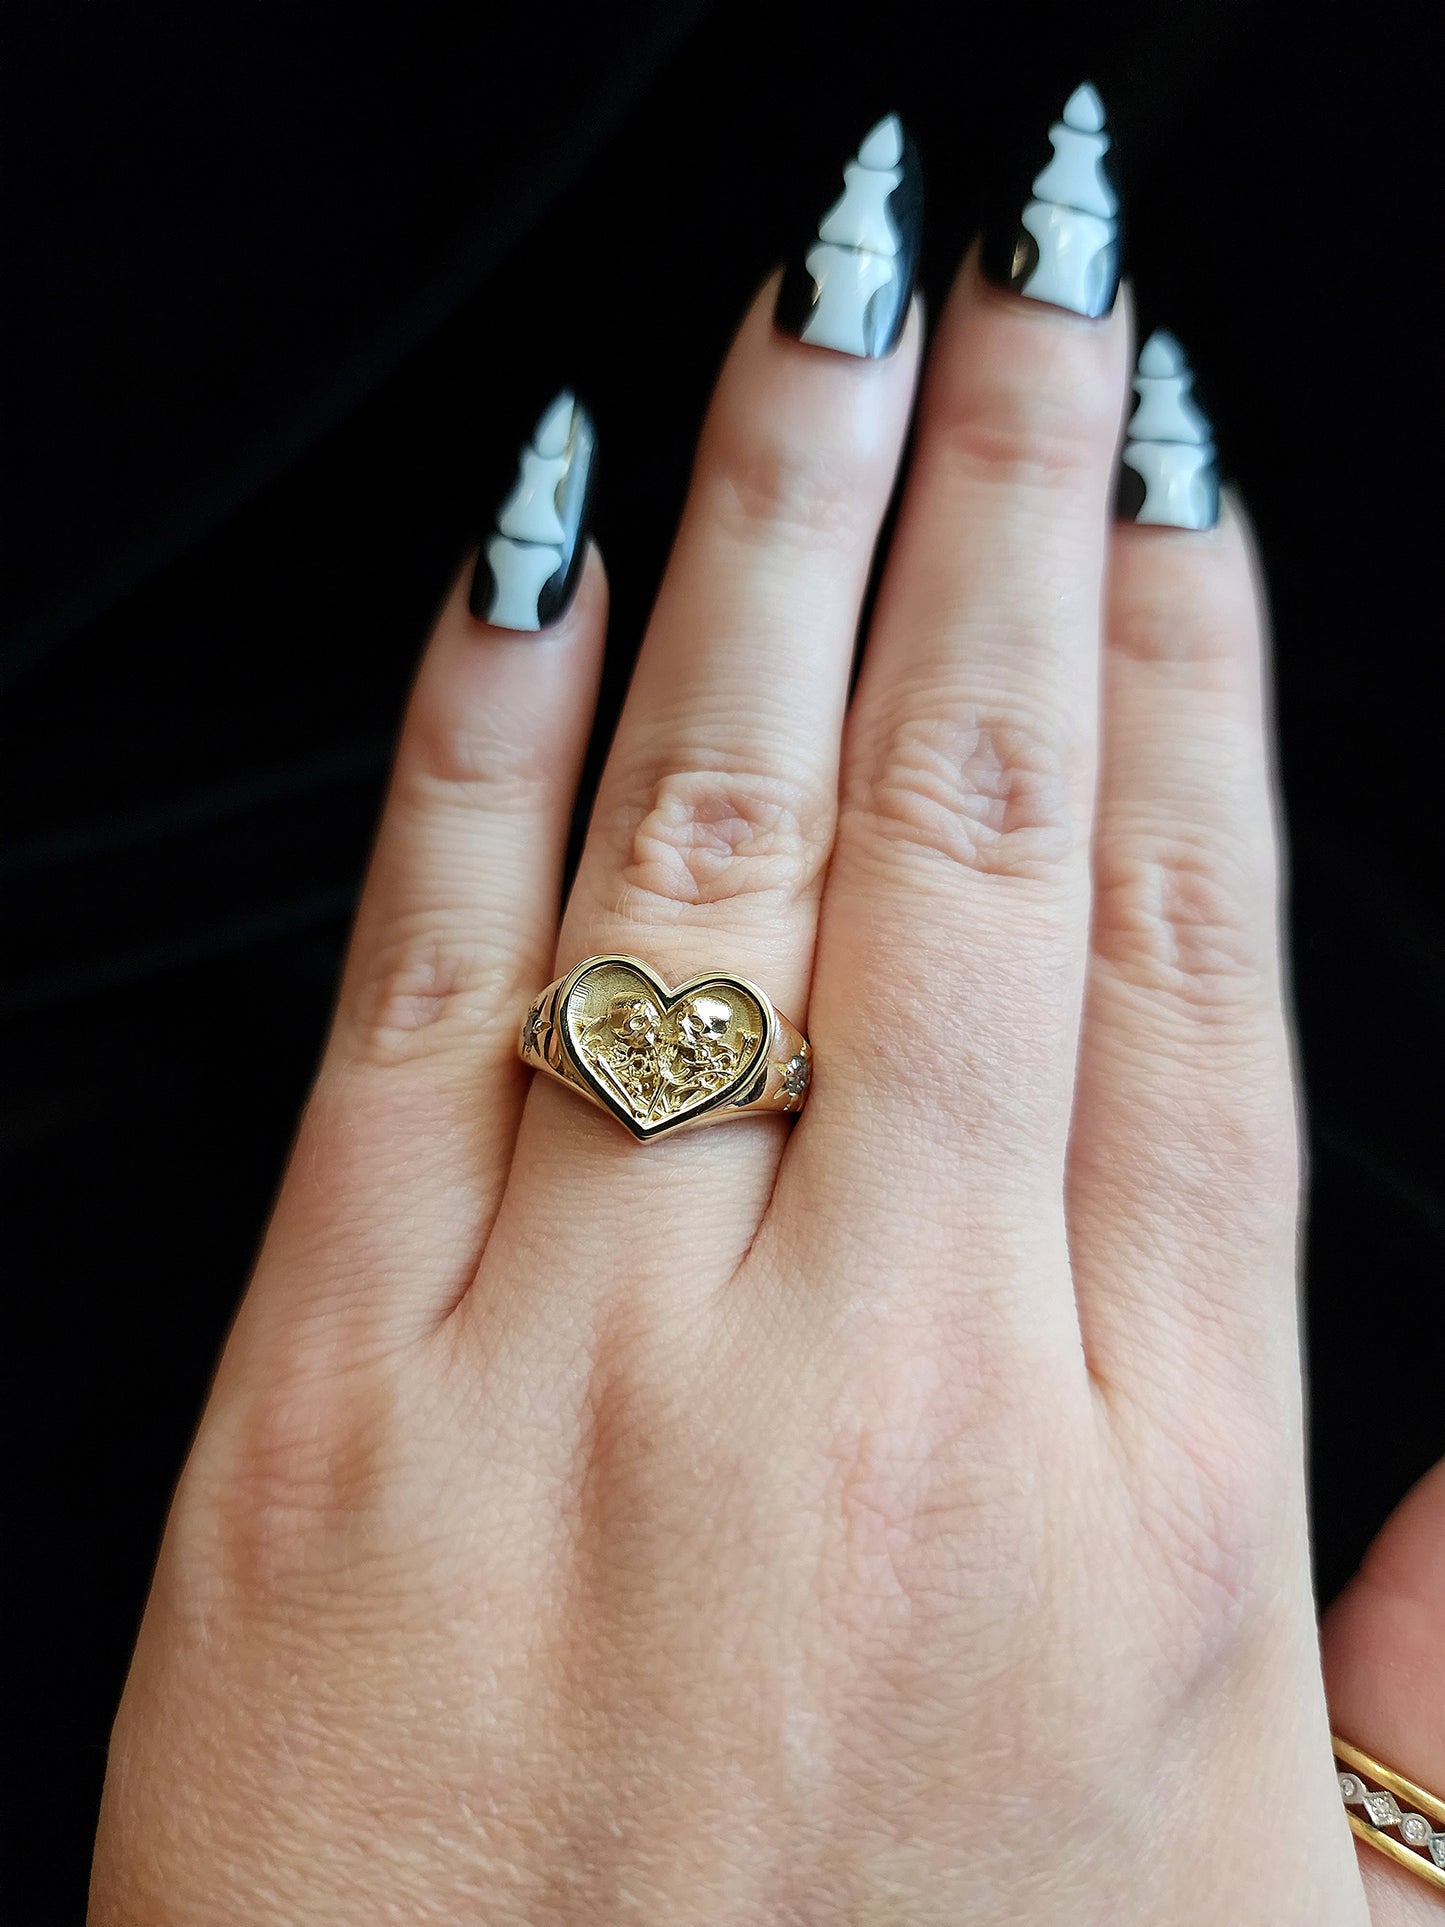 14k heart shaped signet engagement ring the lovers of valdaro gothic fine jewelry fantasy memento mori mourning 